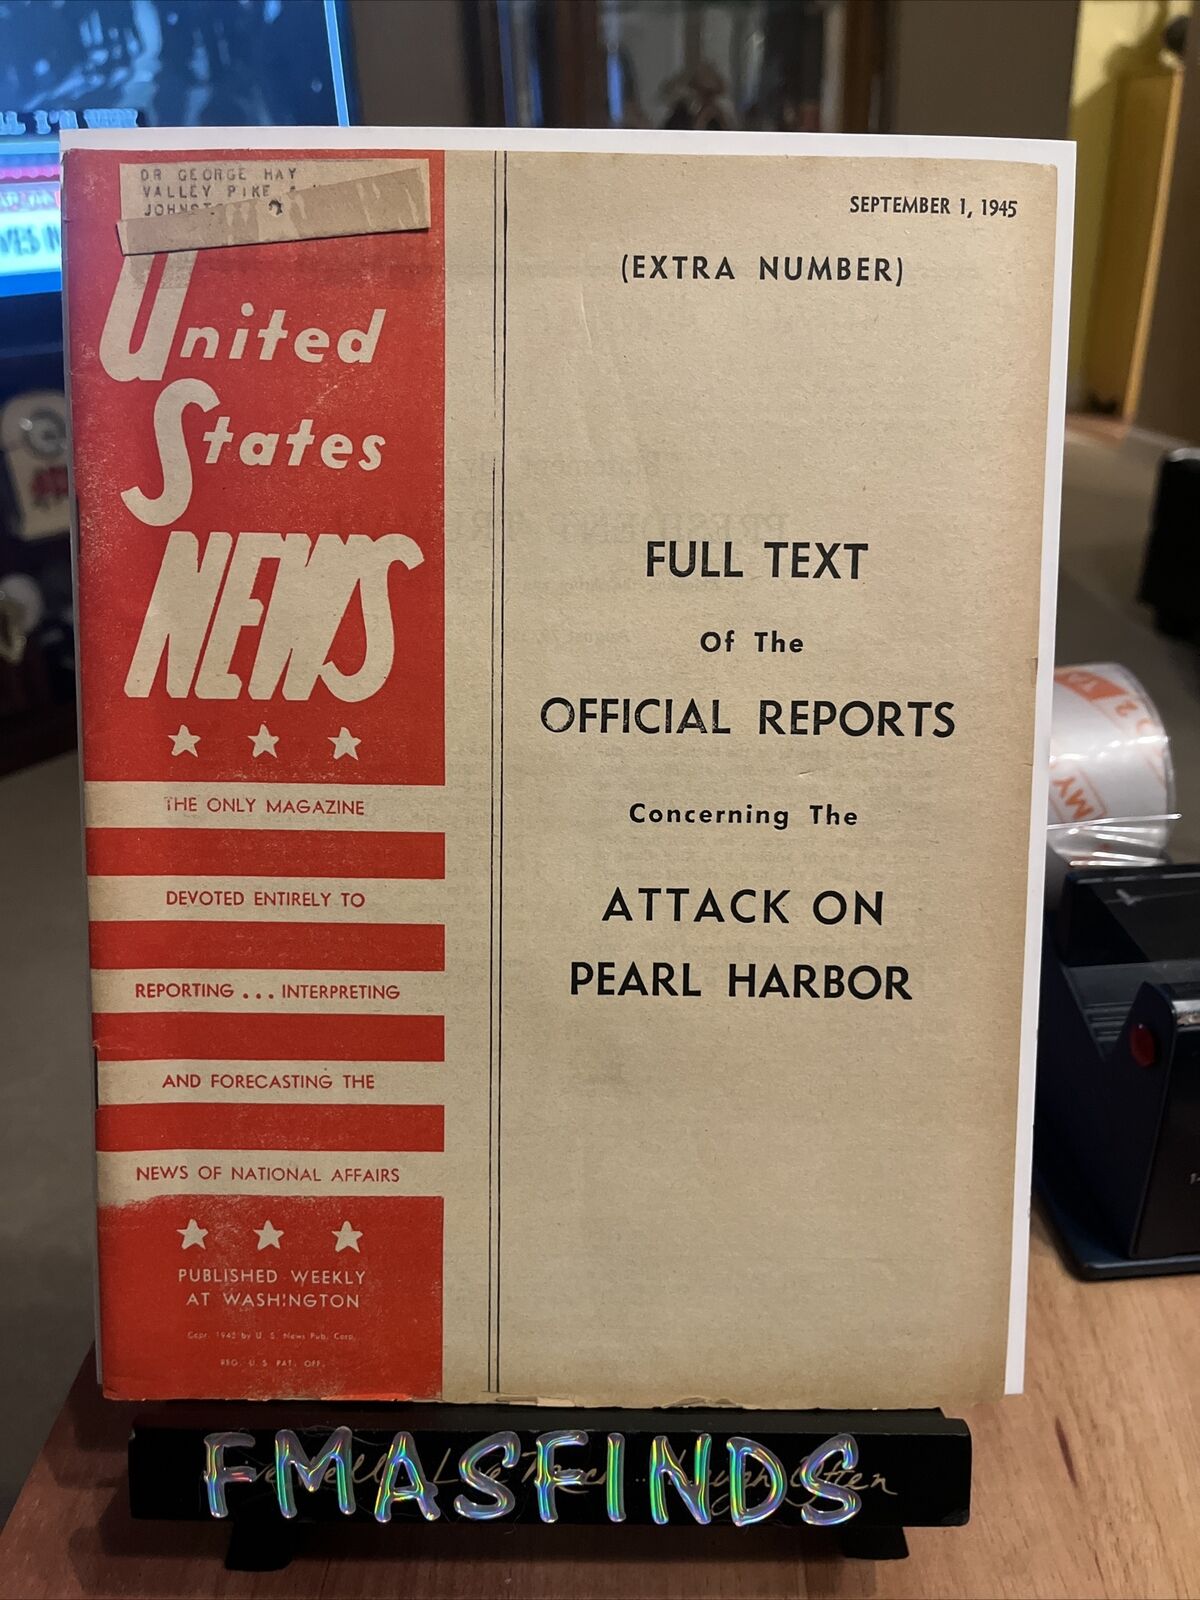 M2 1945 Attack On PEARL HARBOR September 1 Official Report US NEWS MAGAZINE